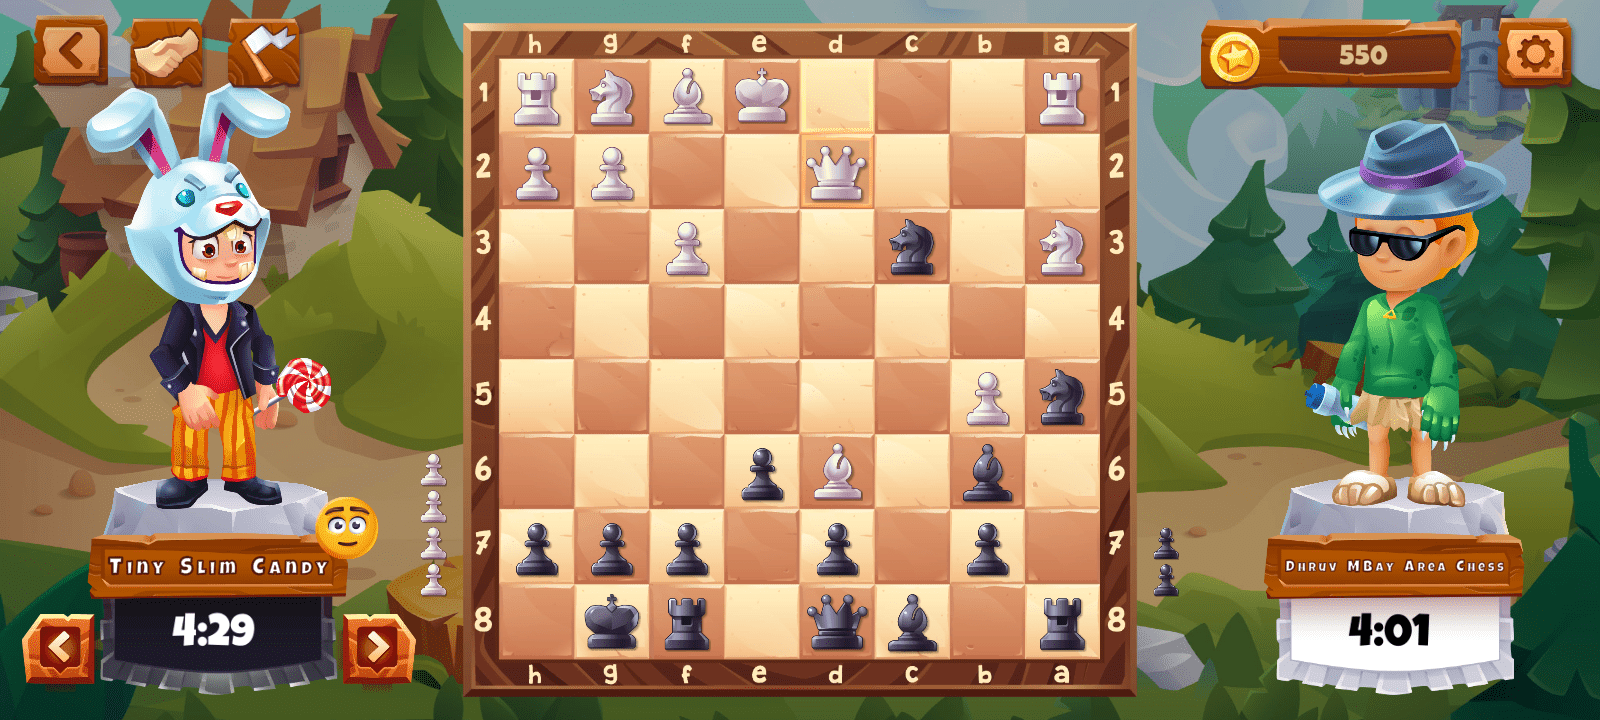 chess game - learn chess - Apps on Google Play